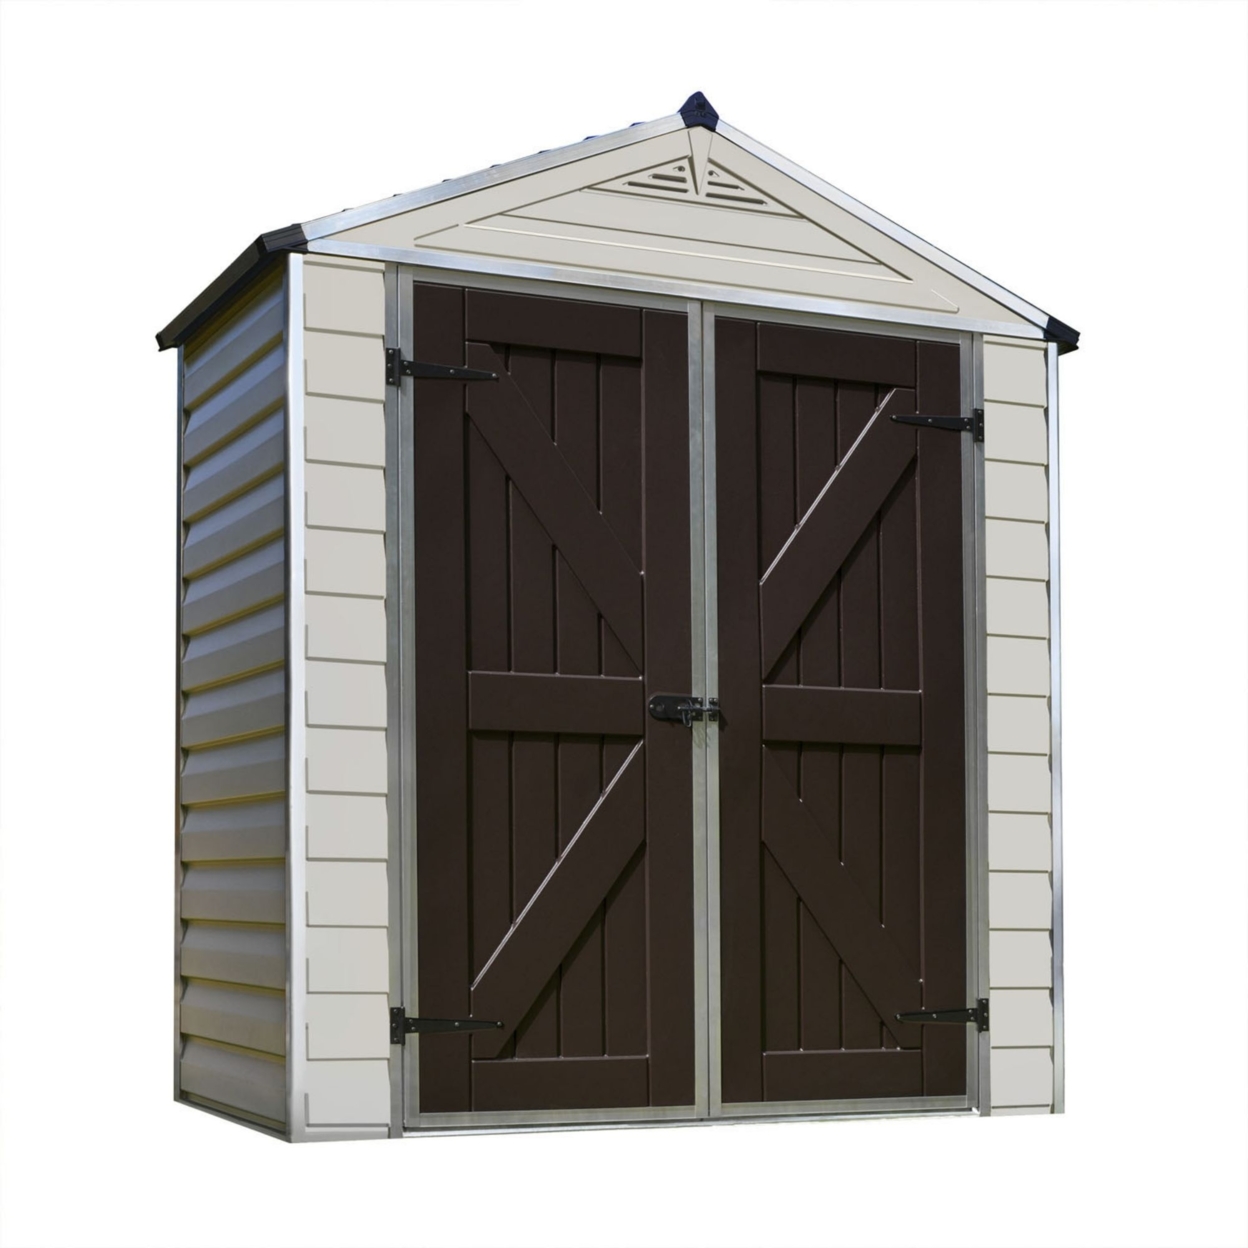 Palram - Canopia SkyLight 6' x 3' Polycarbonate/Aluminum Storage Shed -Tan/Brown - image 1 of 9